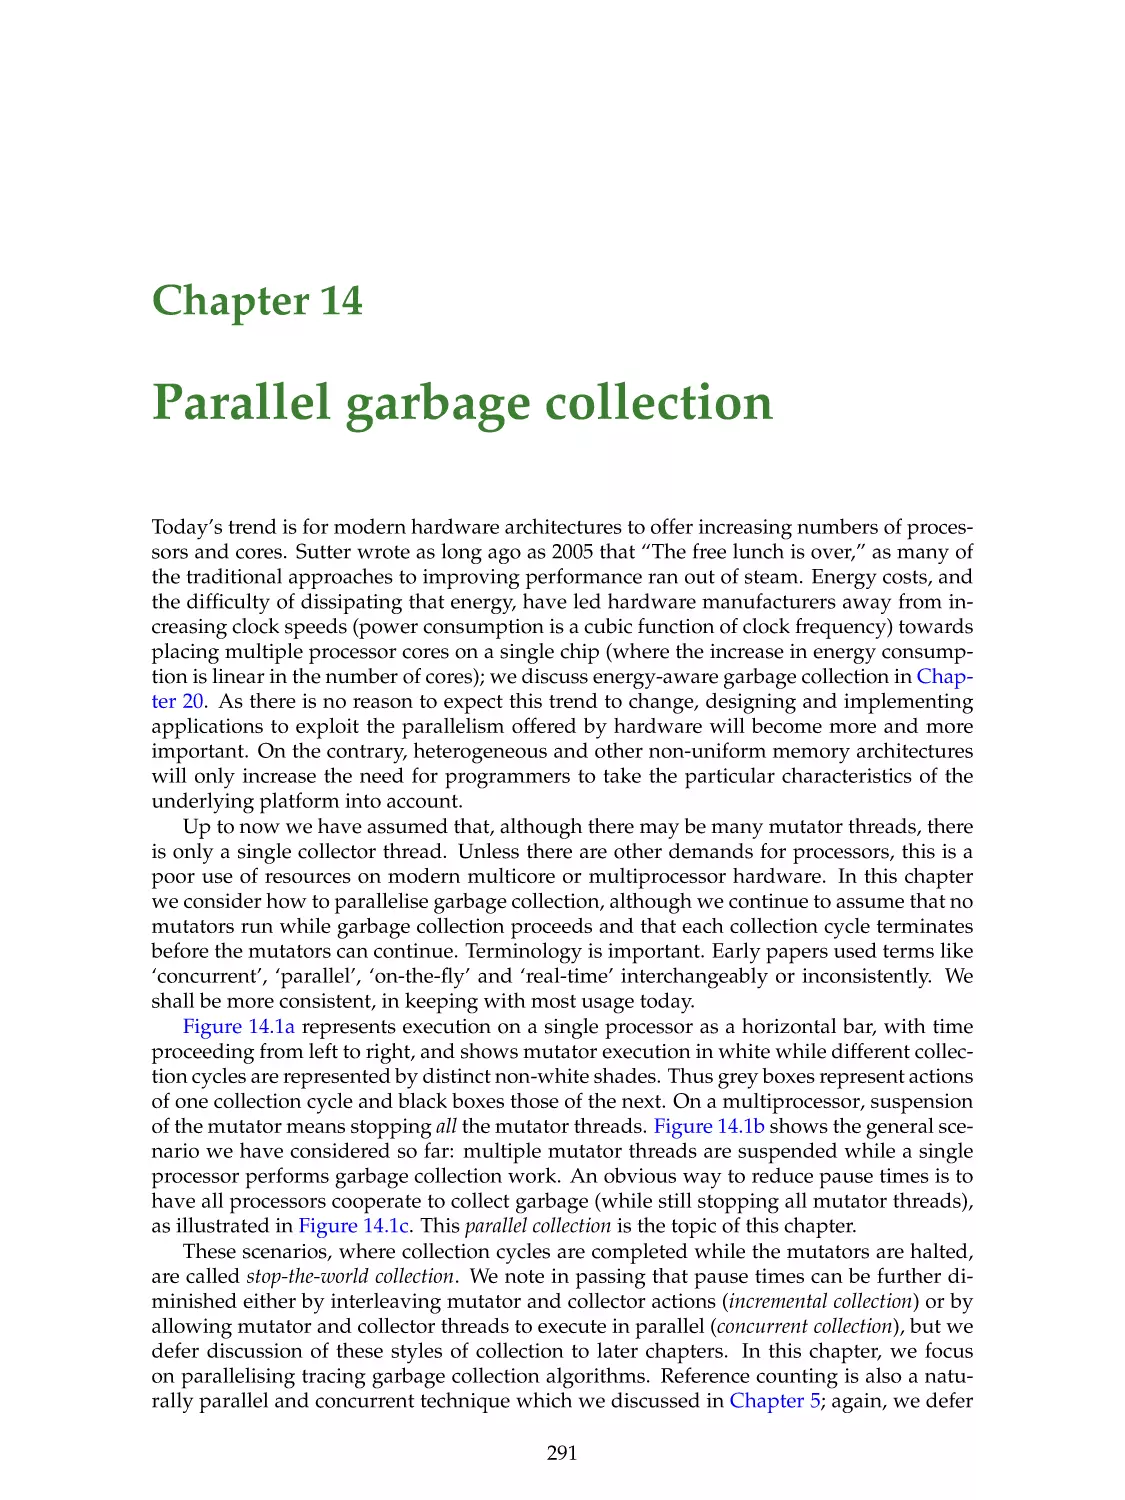 14. Parallel garbage collection